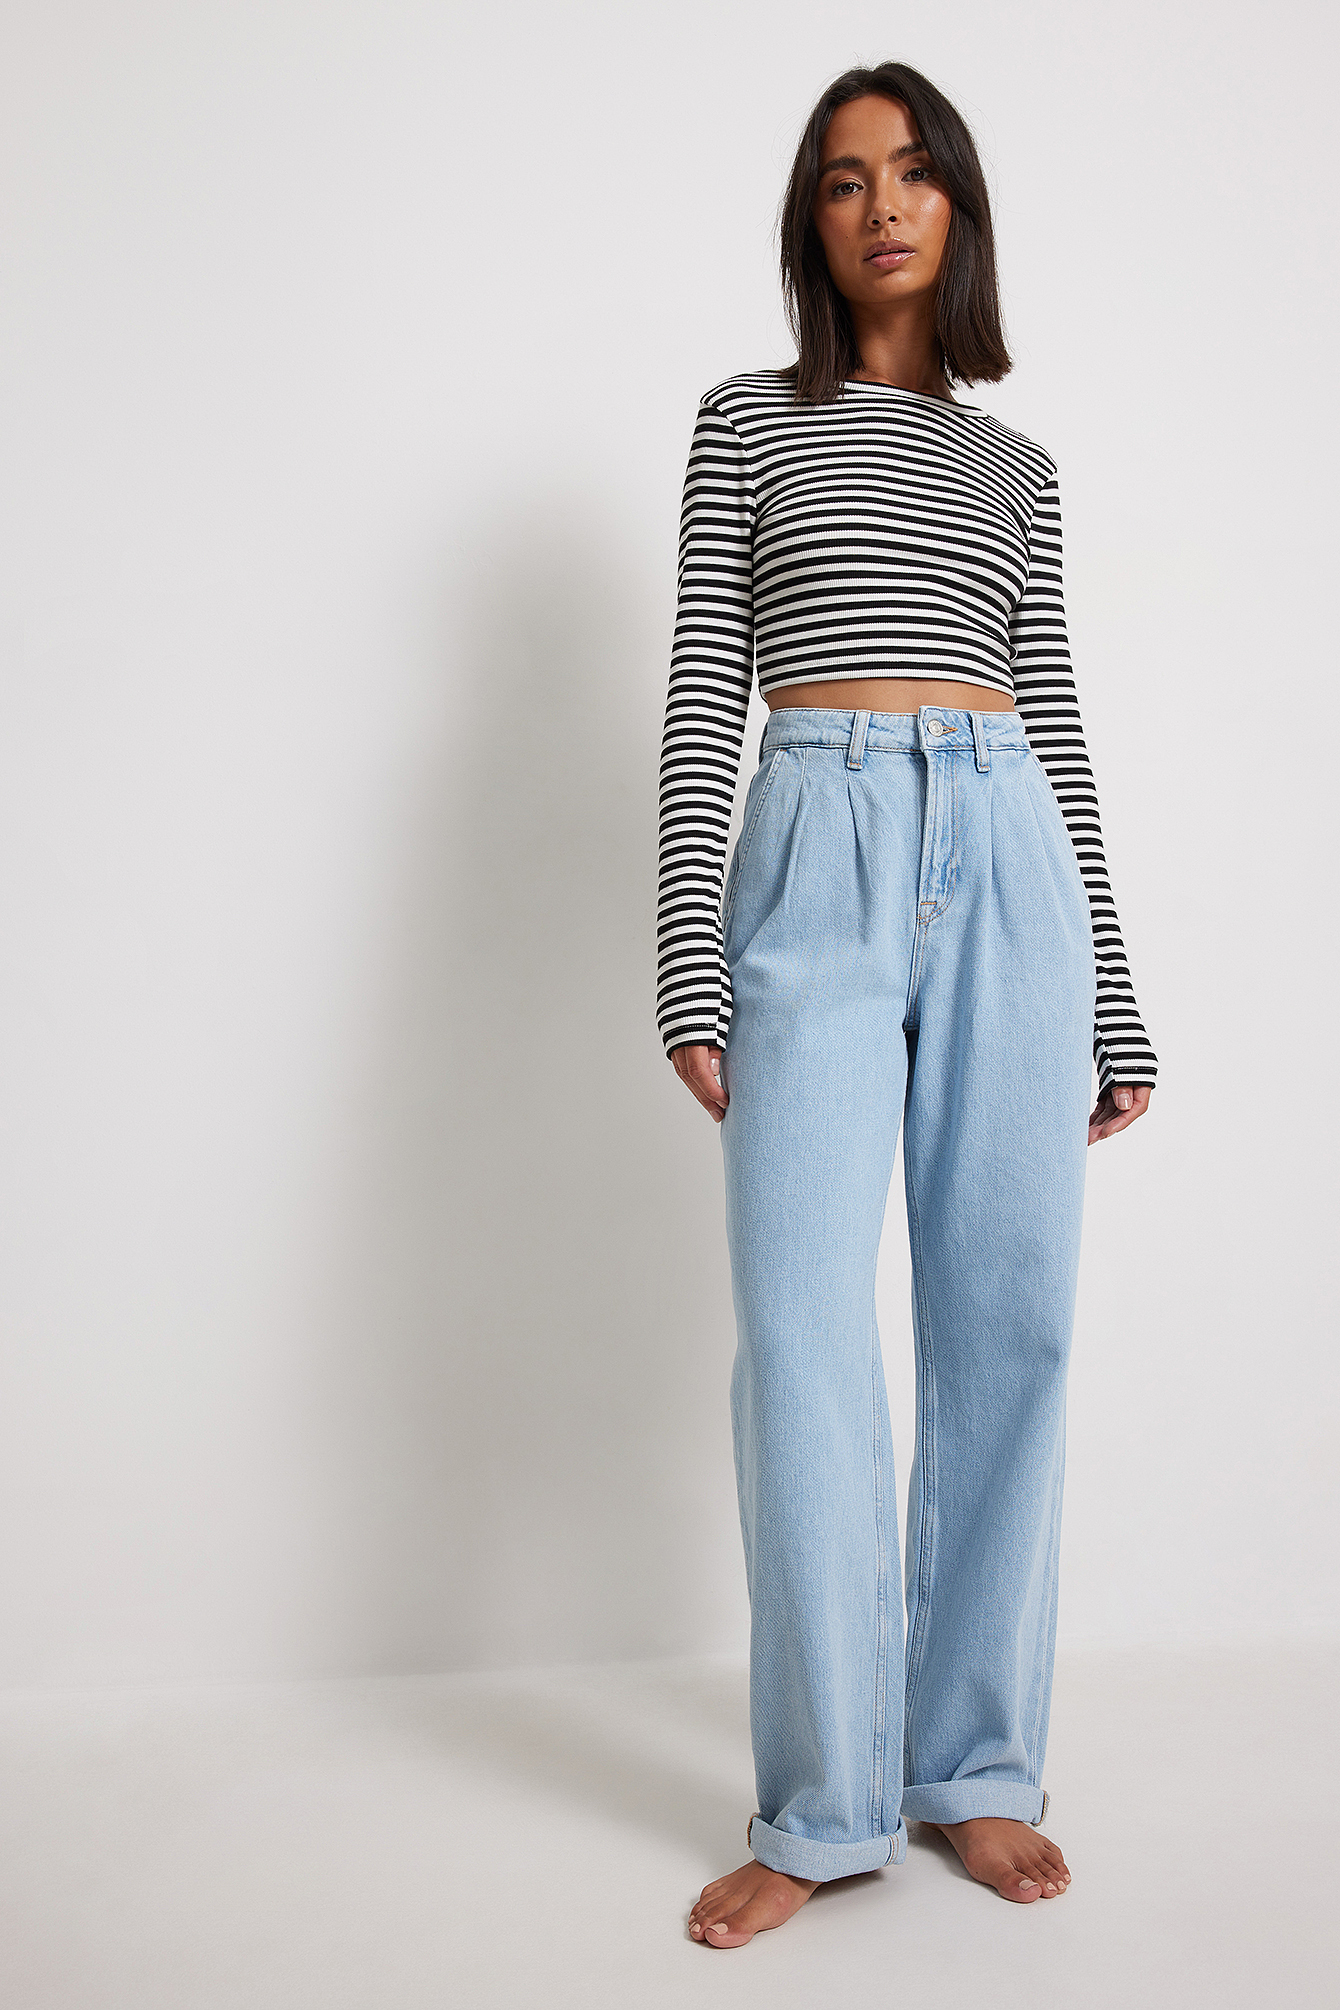 Pleated Fold Up Denim Outfit